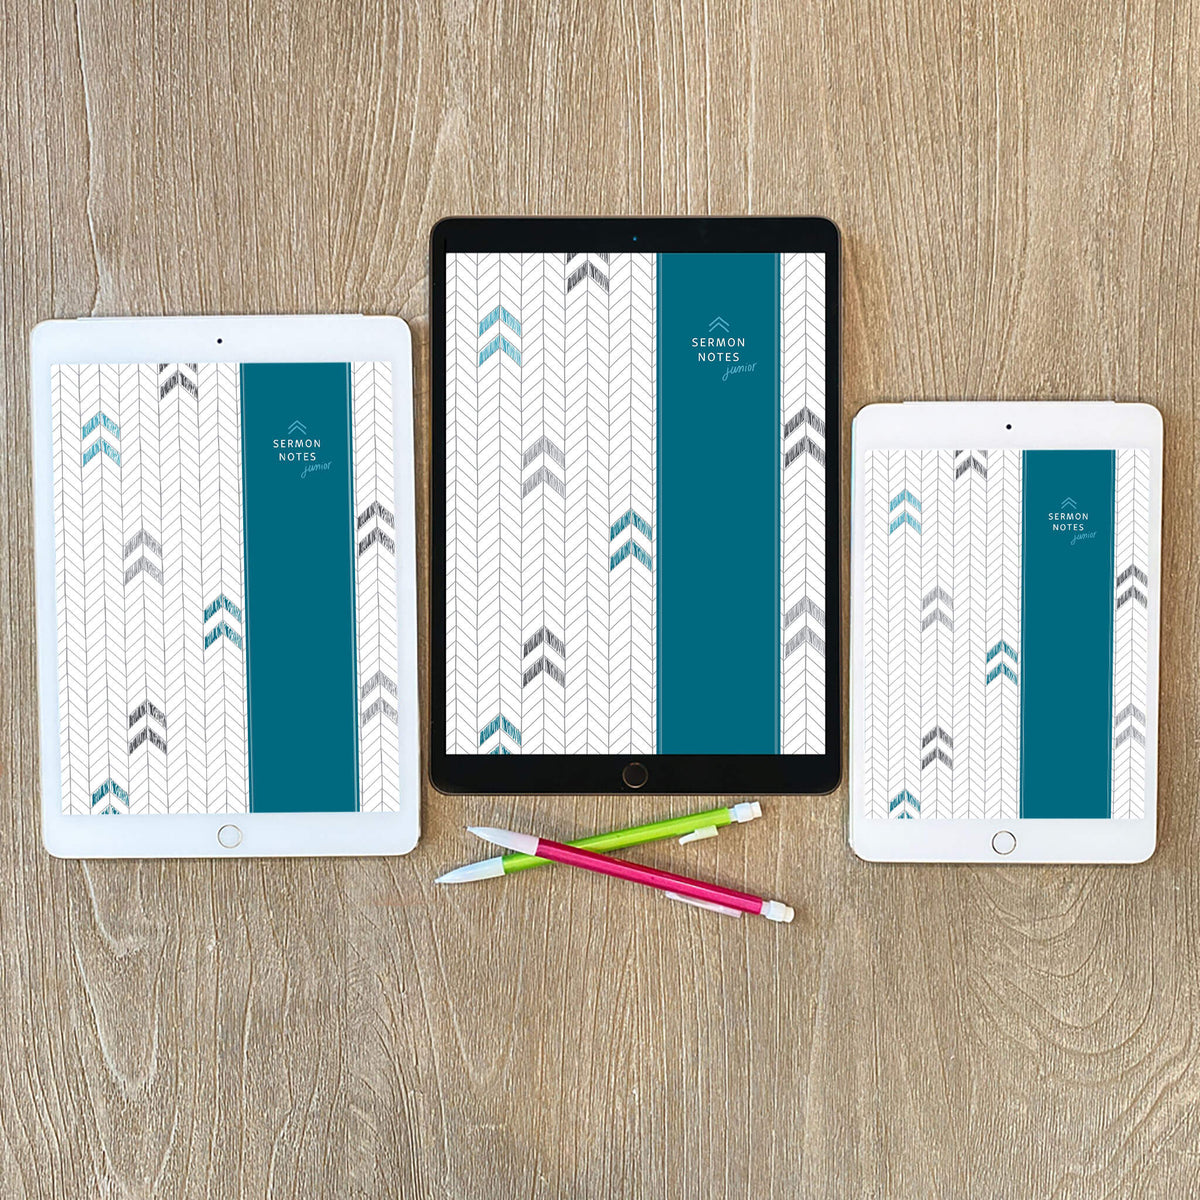 Digital Sermon Notebook for groups